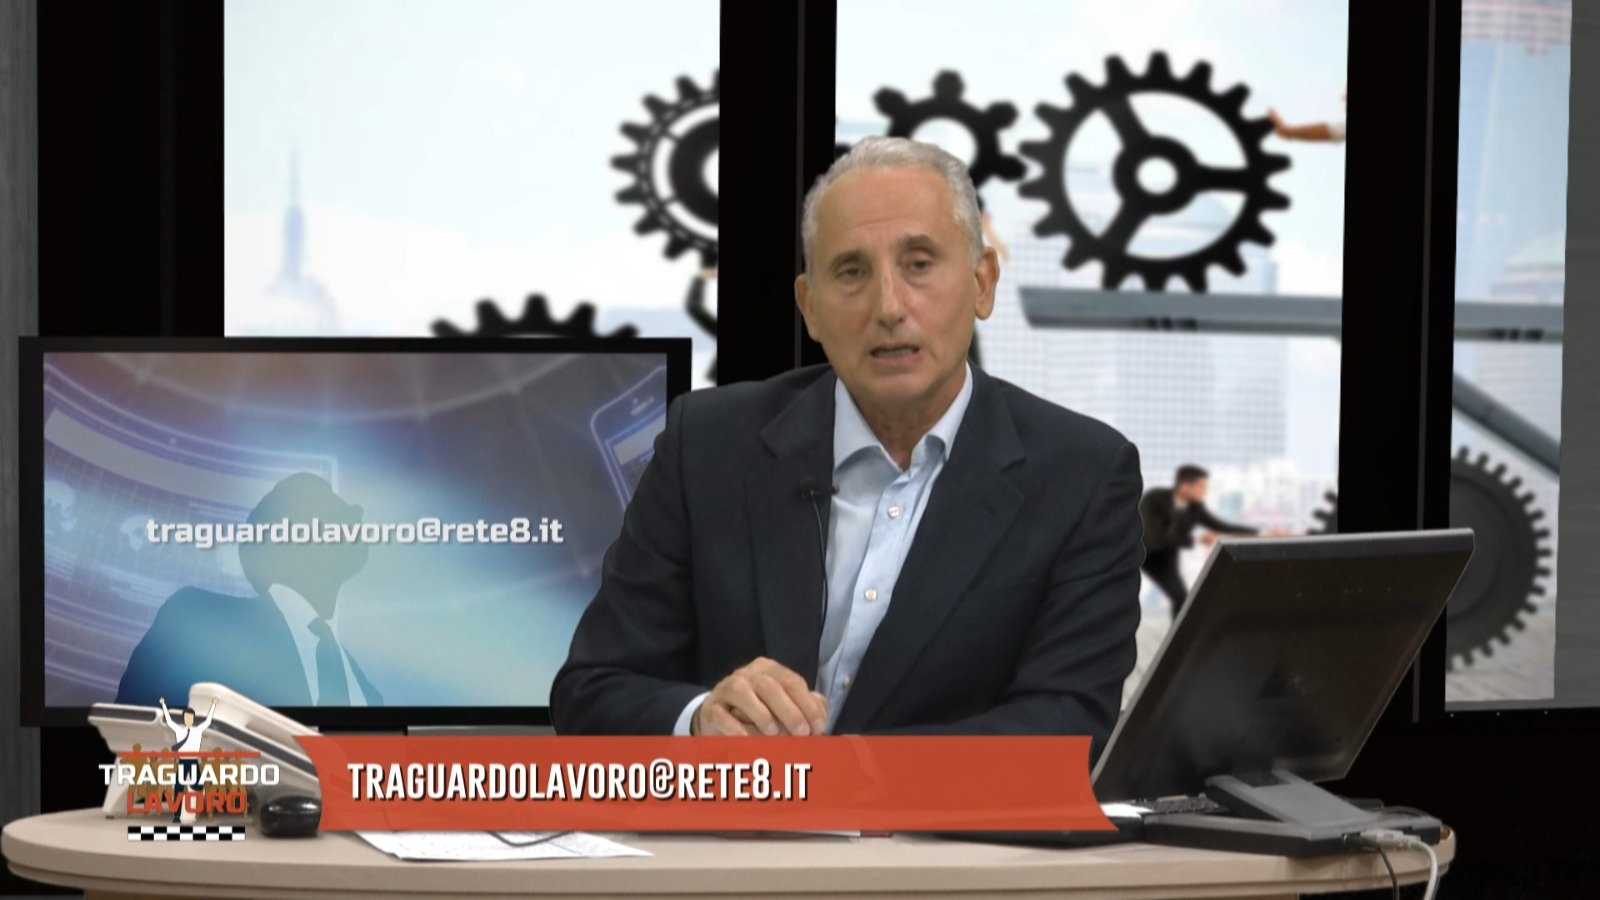 TV shows, space for the world of employment on Rete8 with “Traguardo Lavoro”